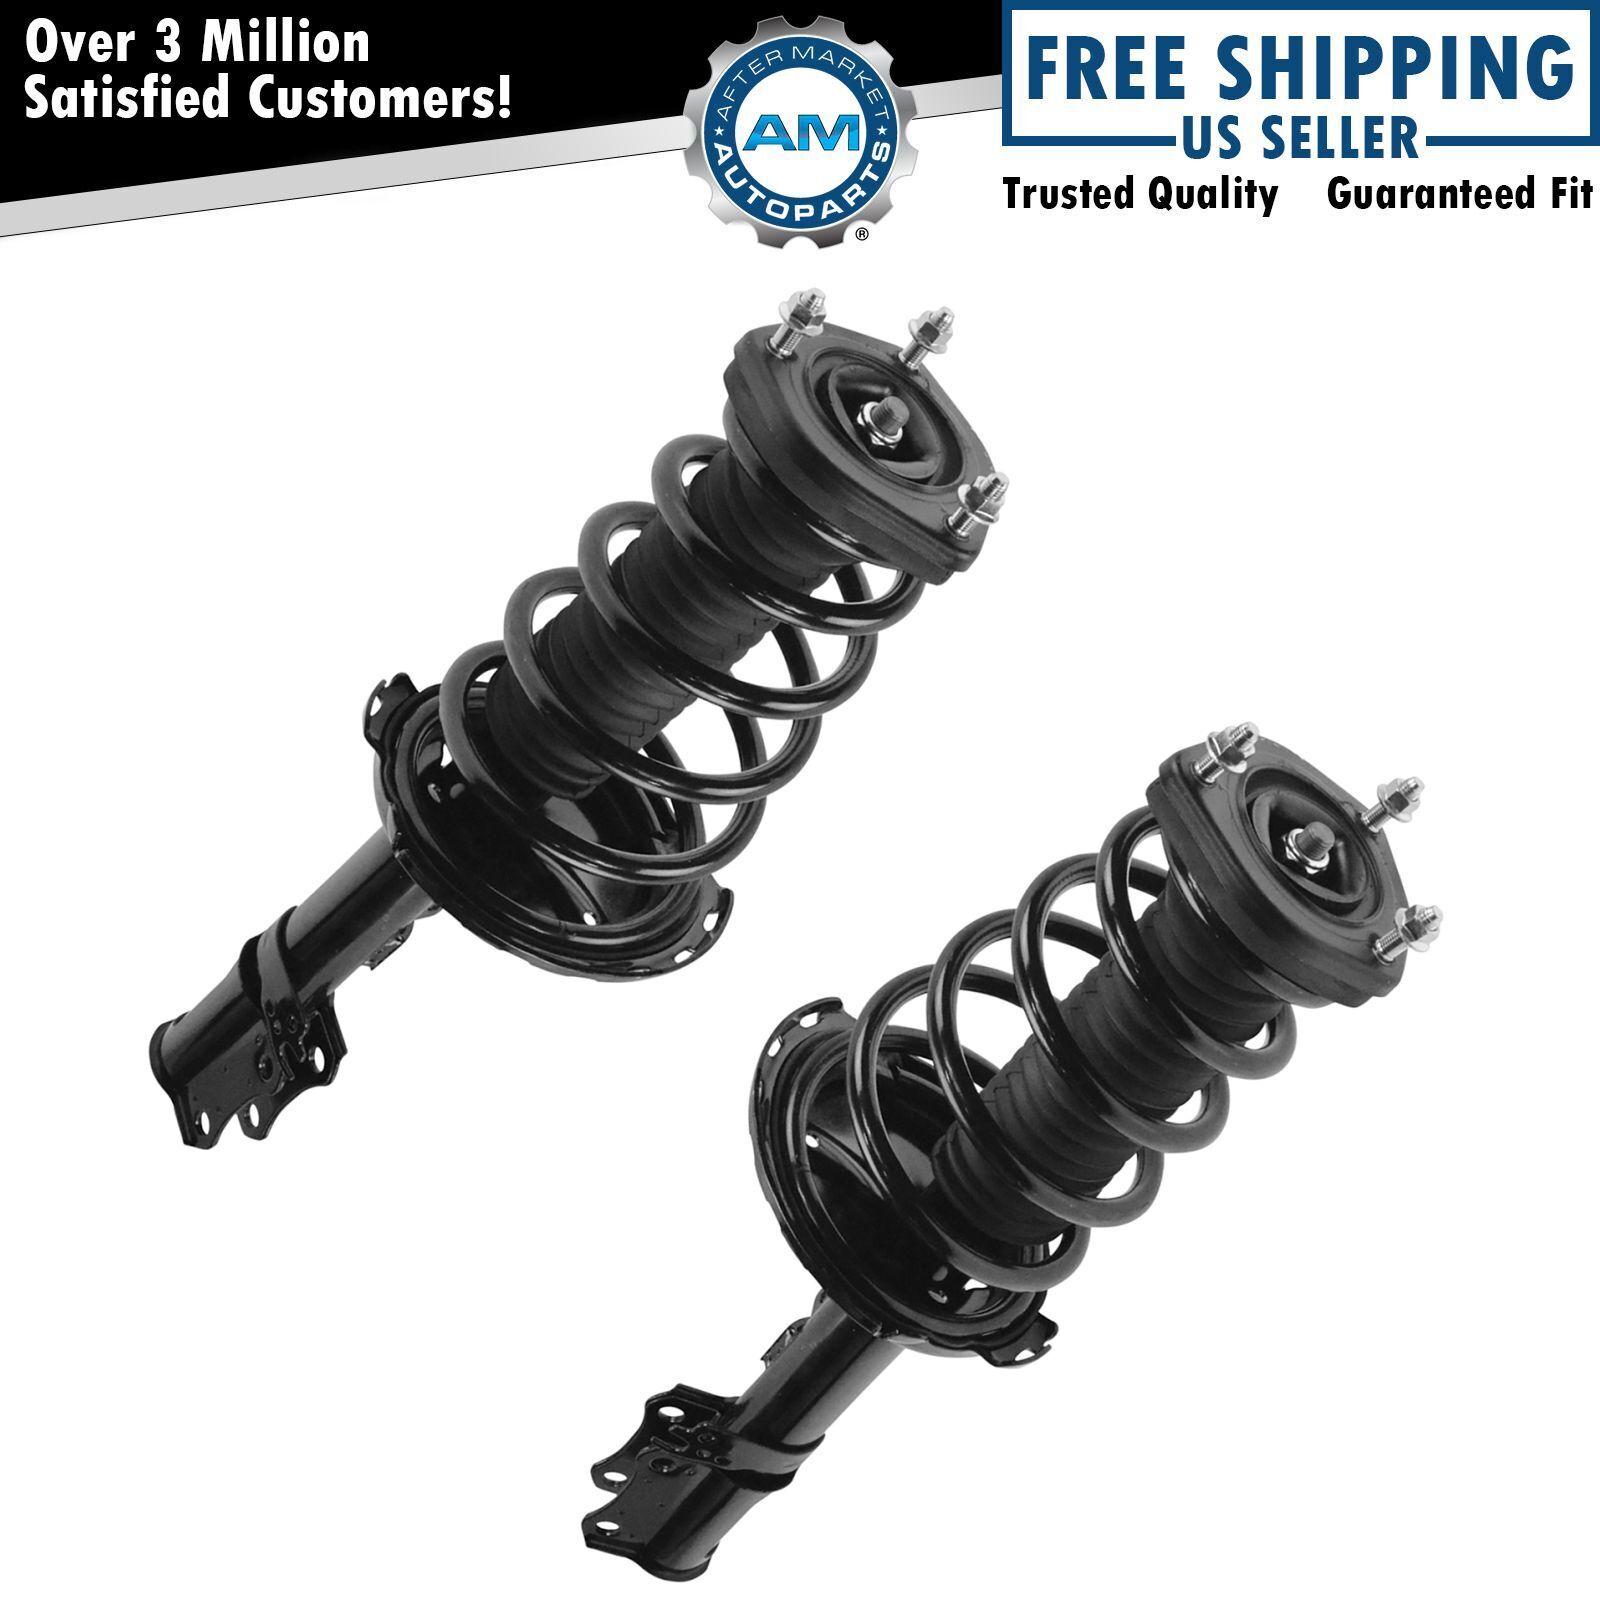 Complete Strut Spring Assembly Pair Set of 2 LH RH Rear for RX330 RX350 AWD 4WD